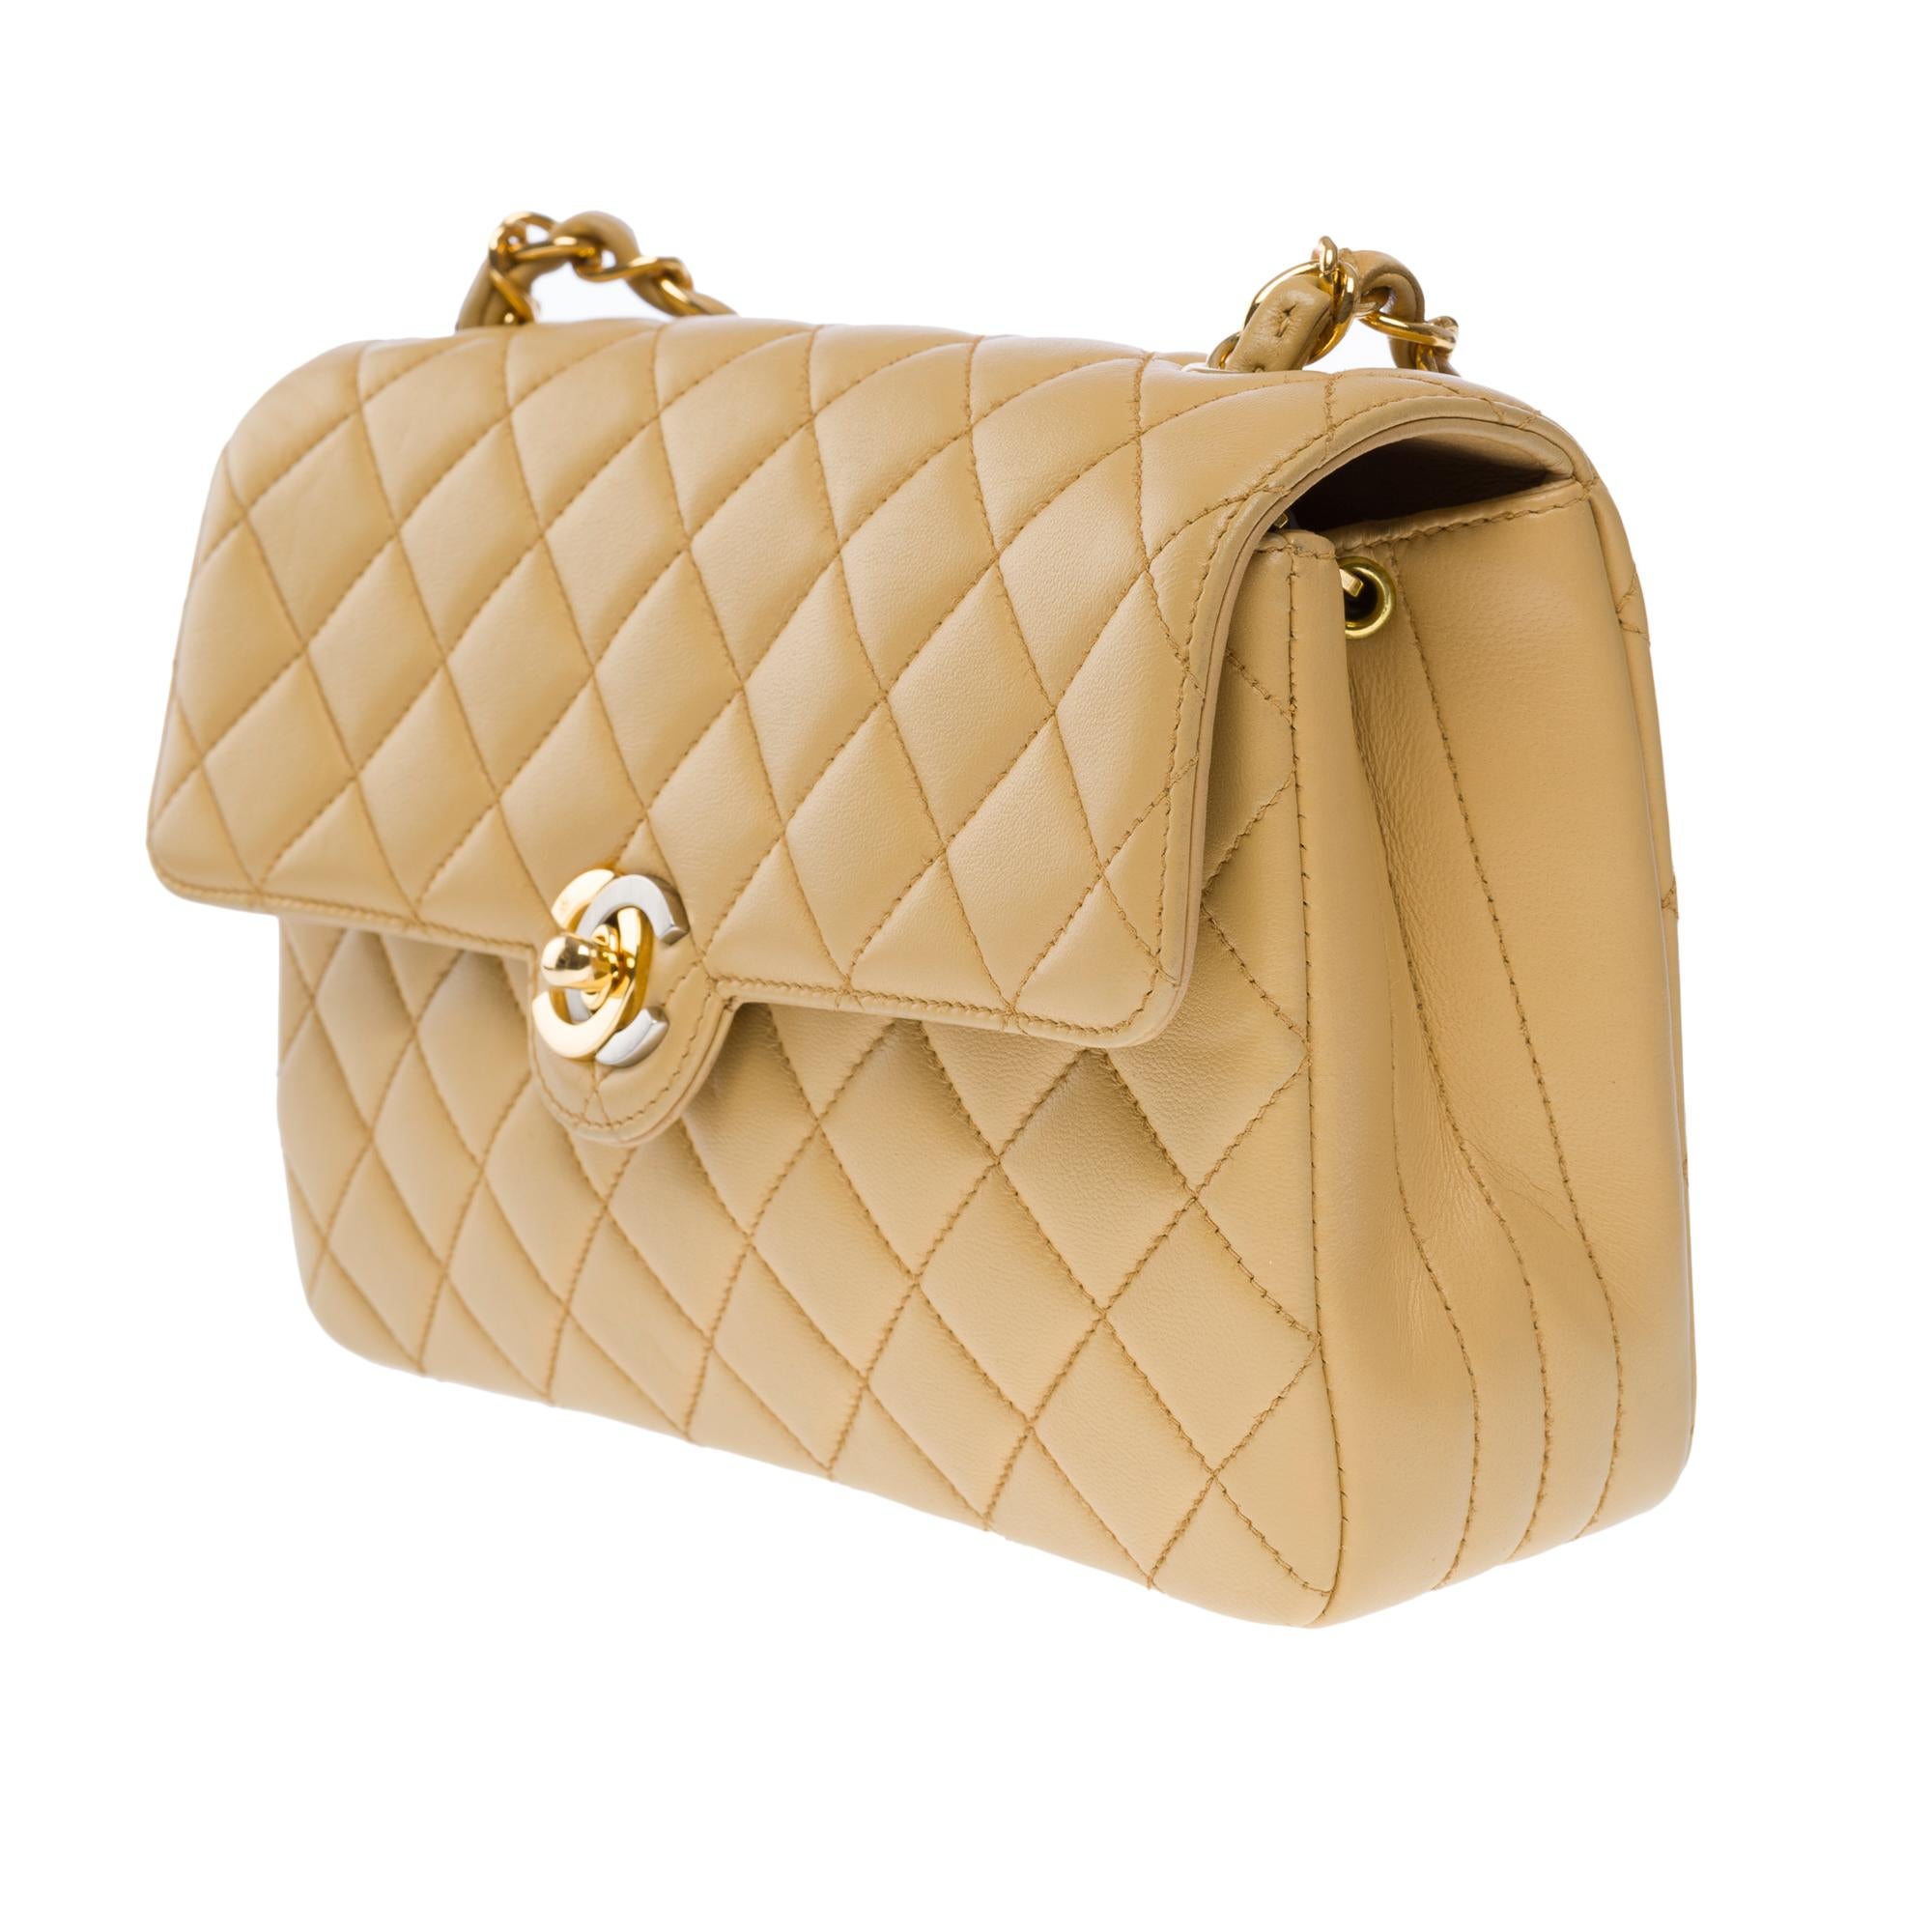 Women's Beautiful Chanel Timeless Mini shoulder Flap bag in beige quilted lambskin, GHW For Sale